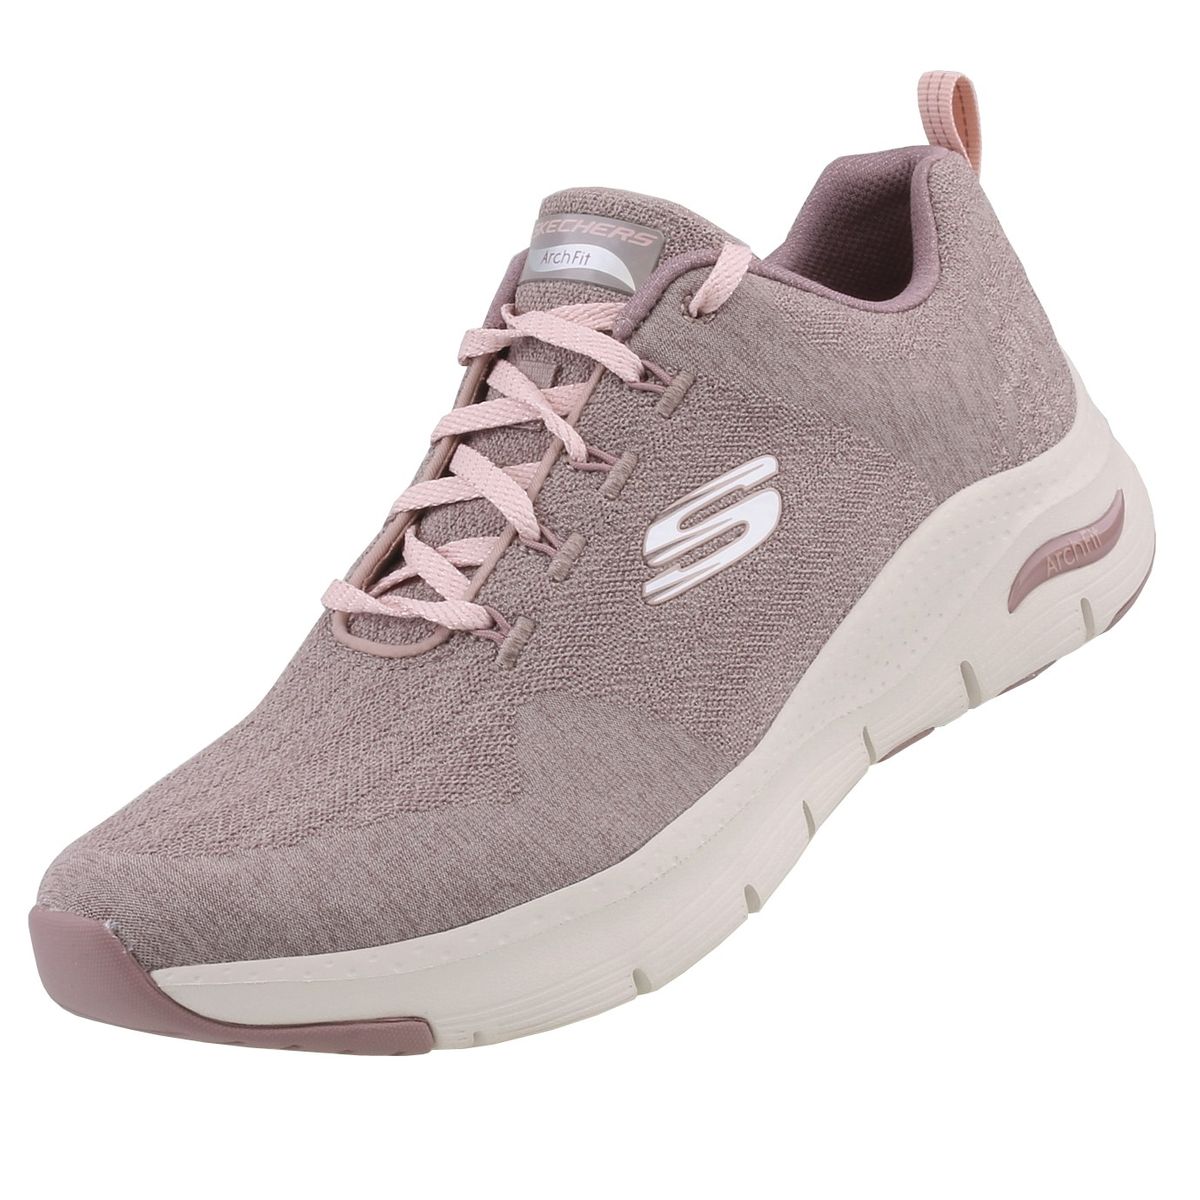 Arch - Skechers Fit Comfy Dark Taupe Wave -